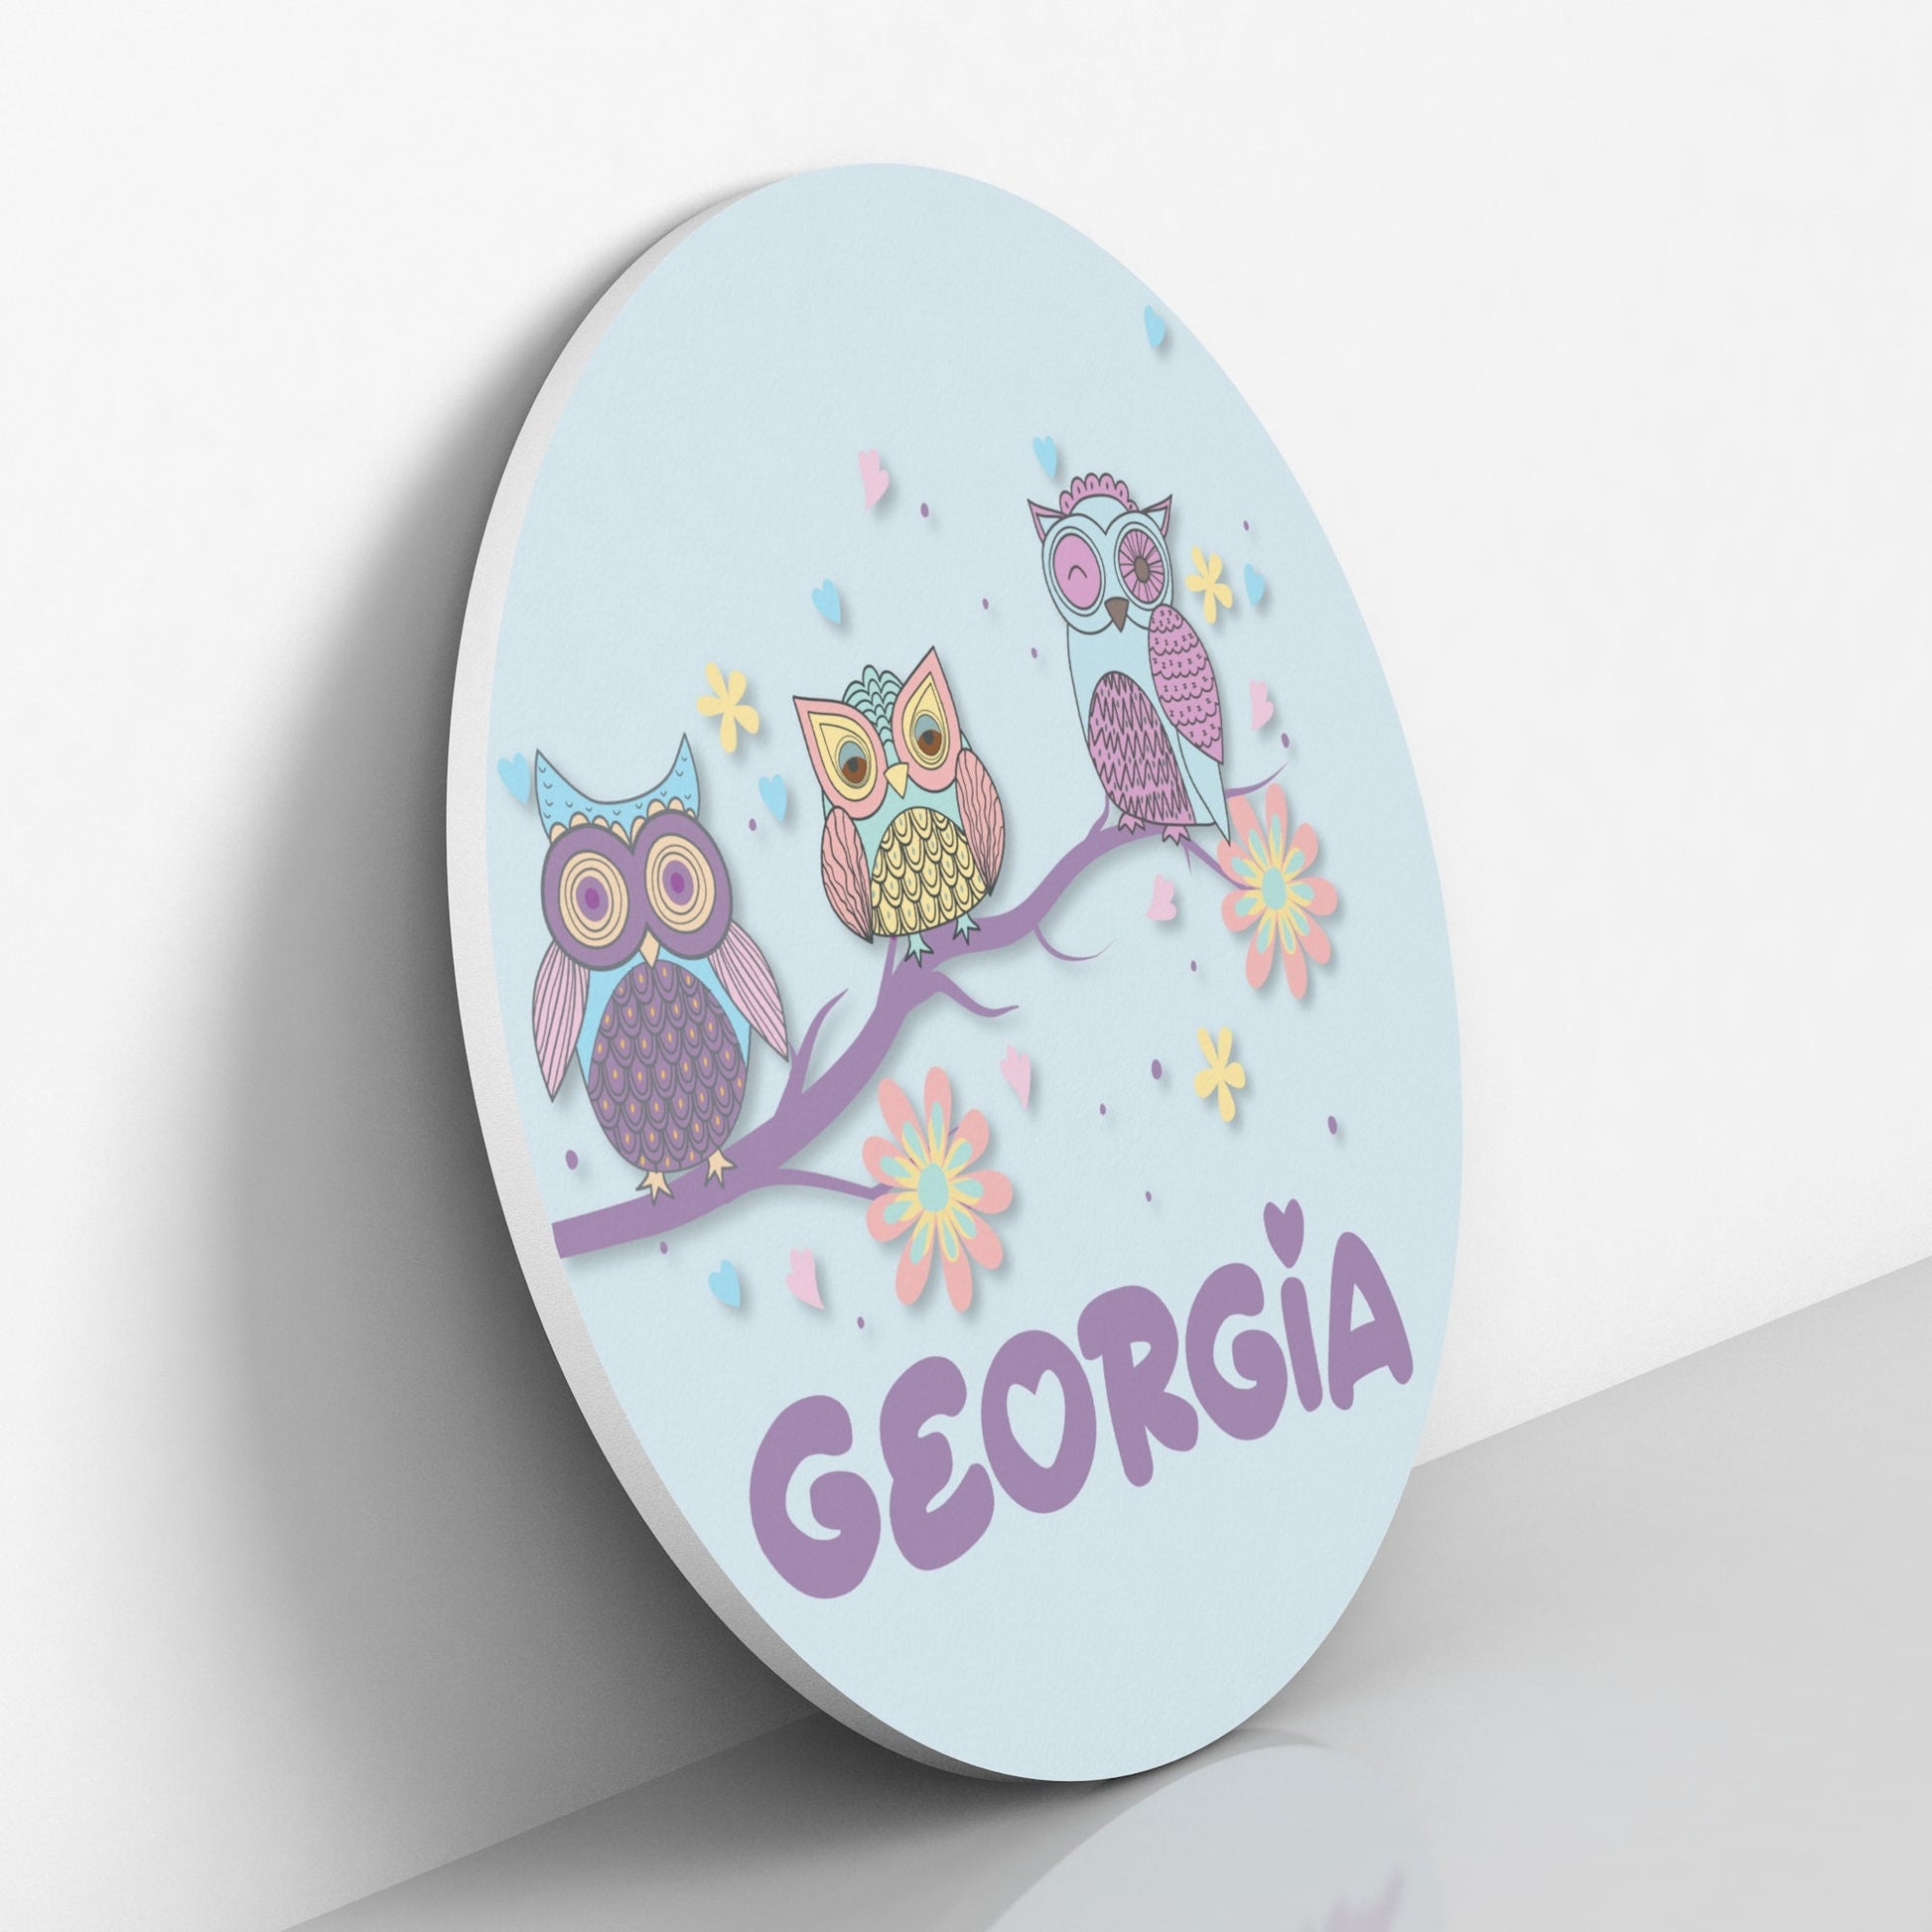 Round Personalized Name Sign with Woodland Owls